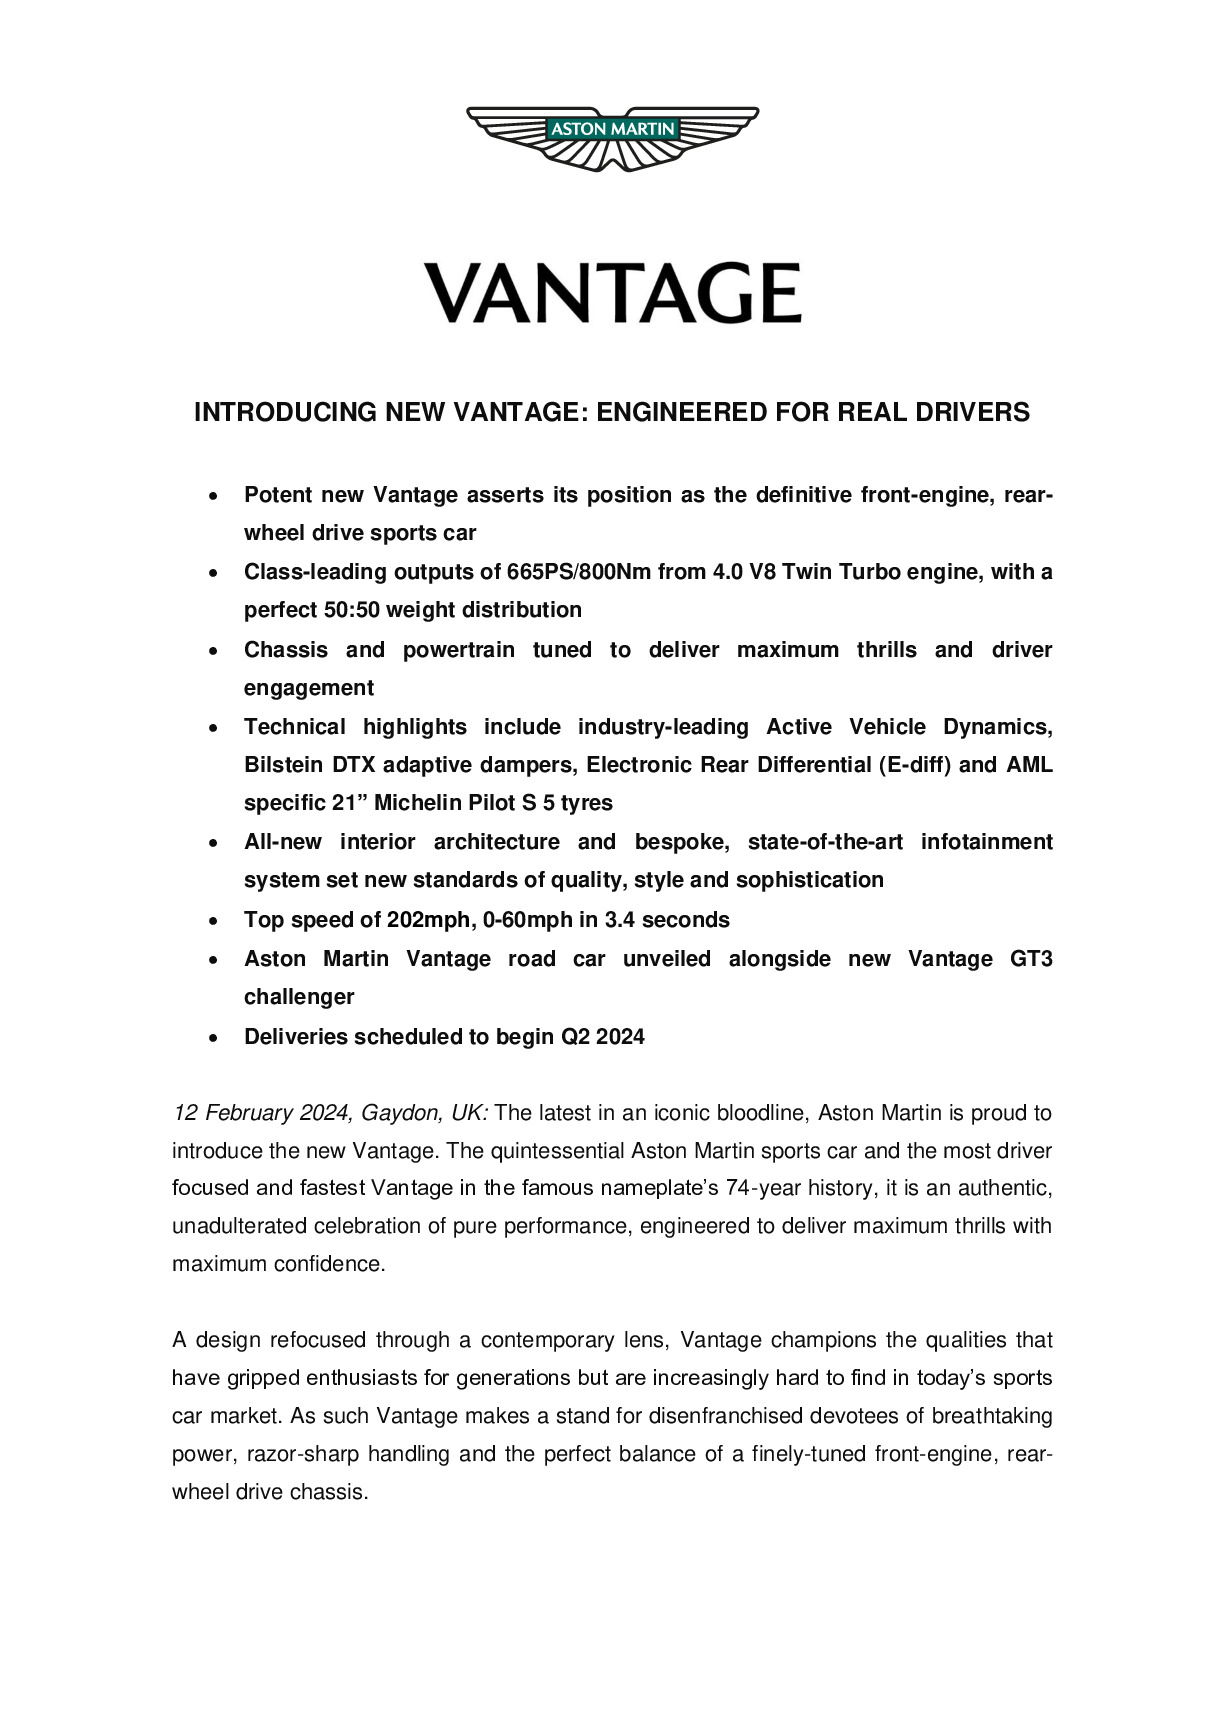 Introducing new Vantage - Engineered for real drivers-pdf